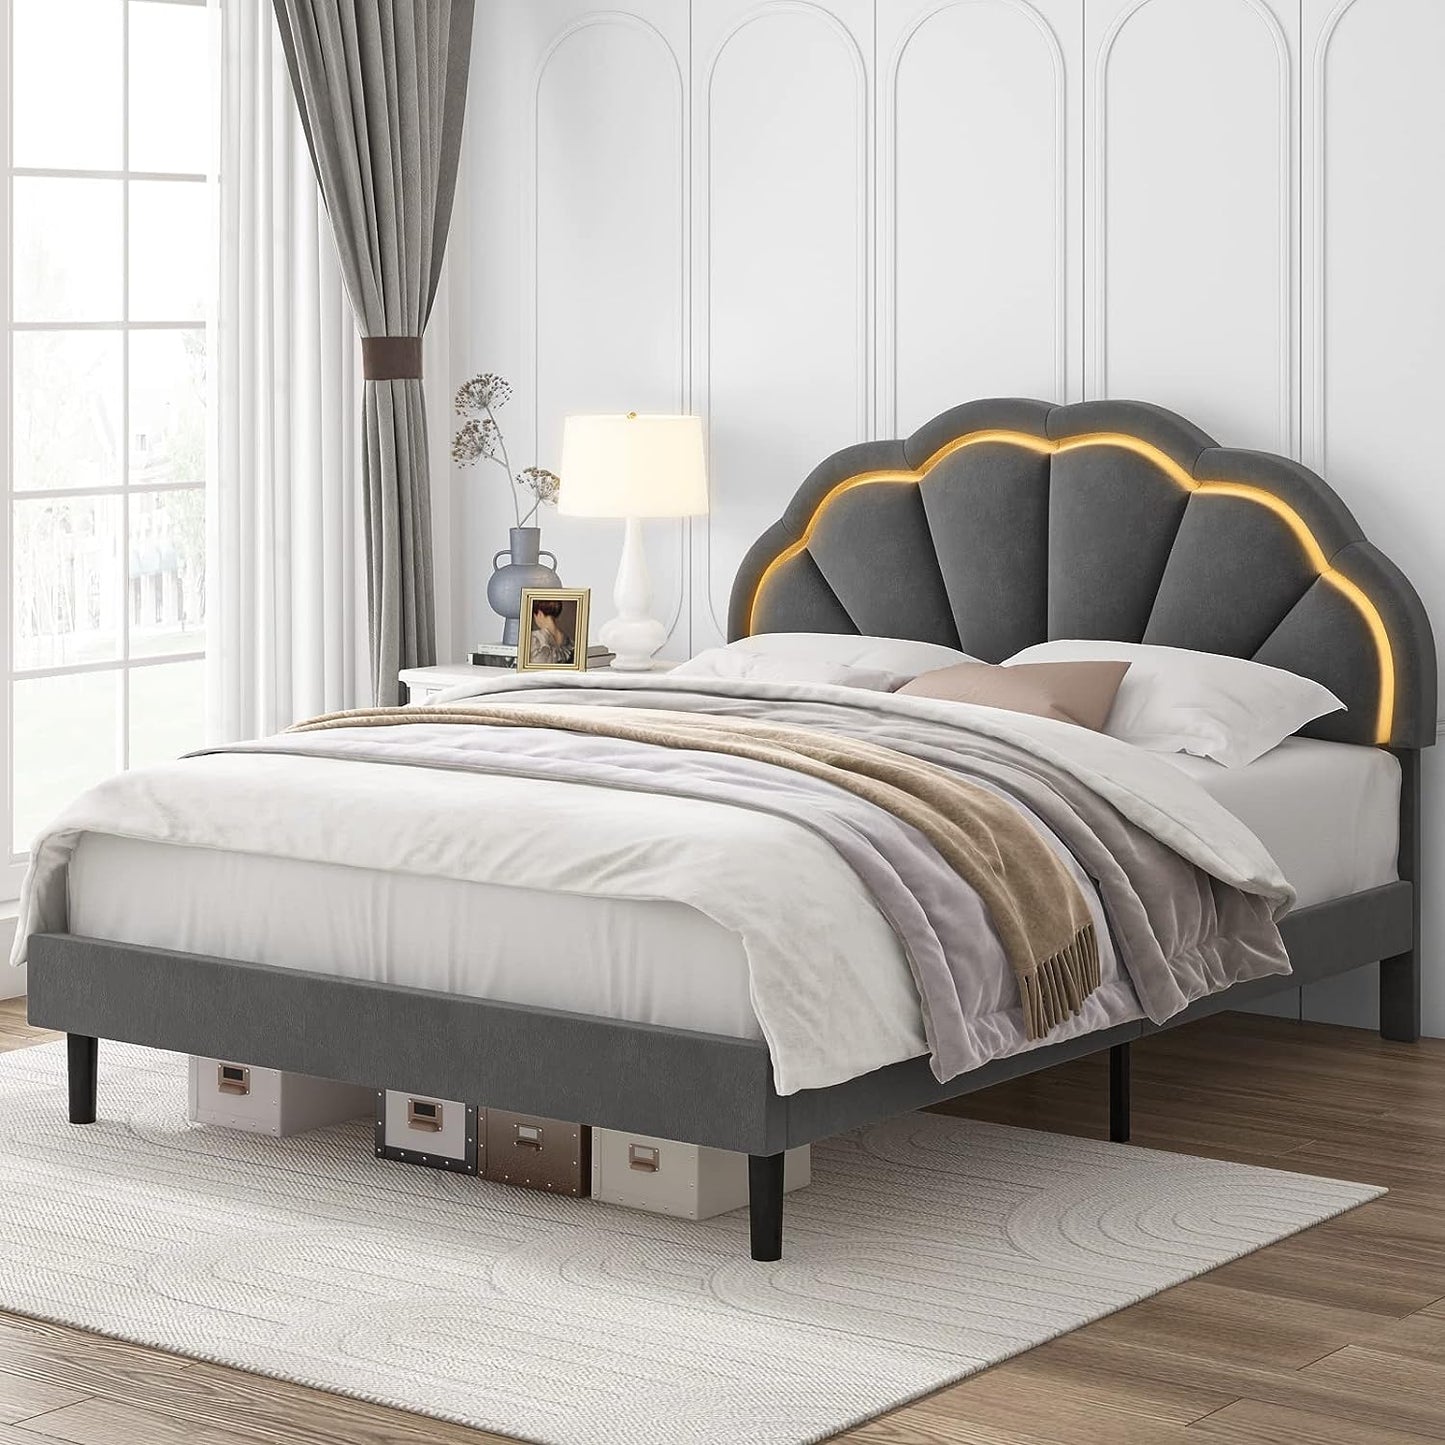 HIFIT Queen Upholstered Smart LED Bed Frame with Adjustable Elegant Flowers Headboard, Platform Bed Frame Queen Size with Wooden Slats Support, No Box Spring Needed, Easy Assembly, Beige